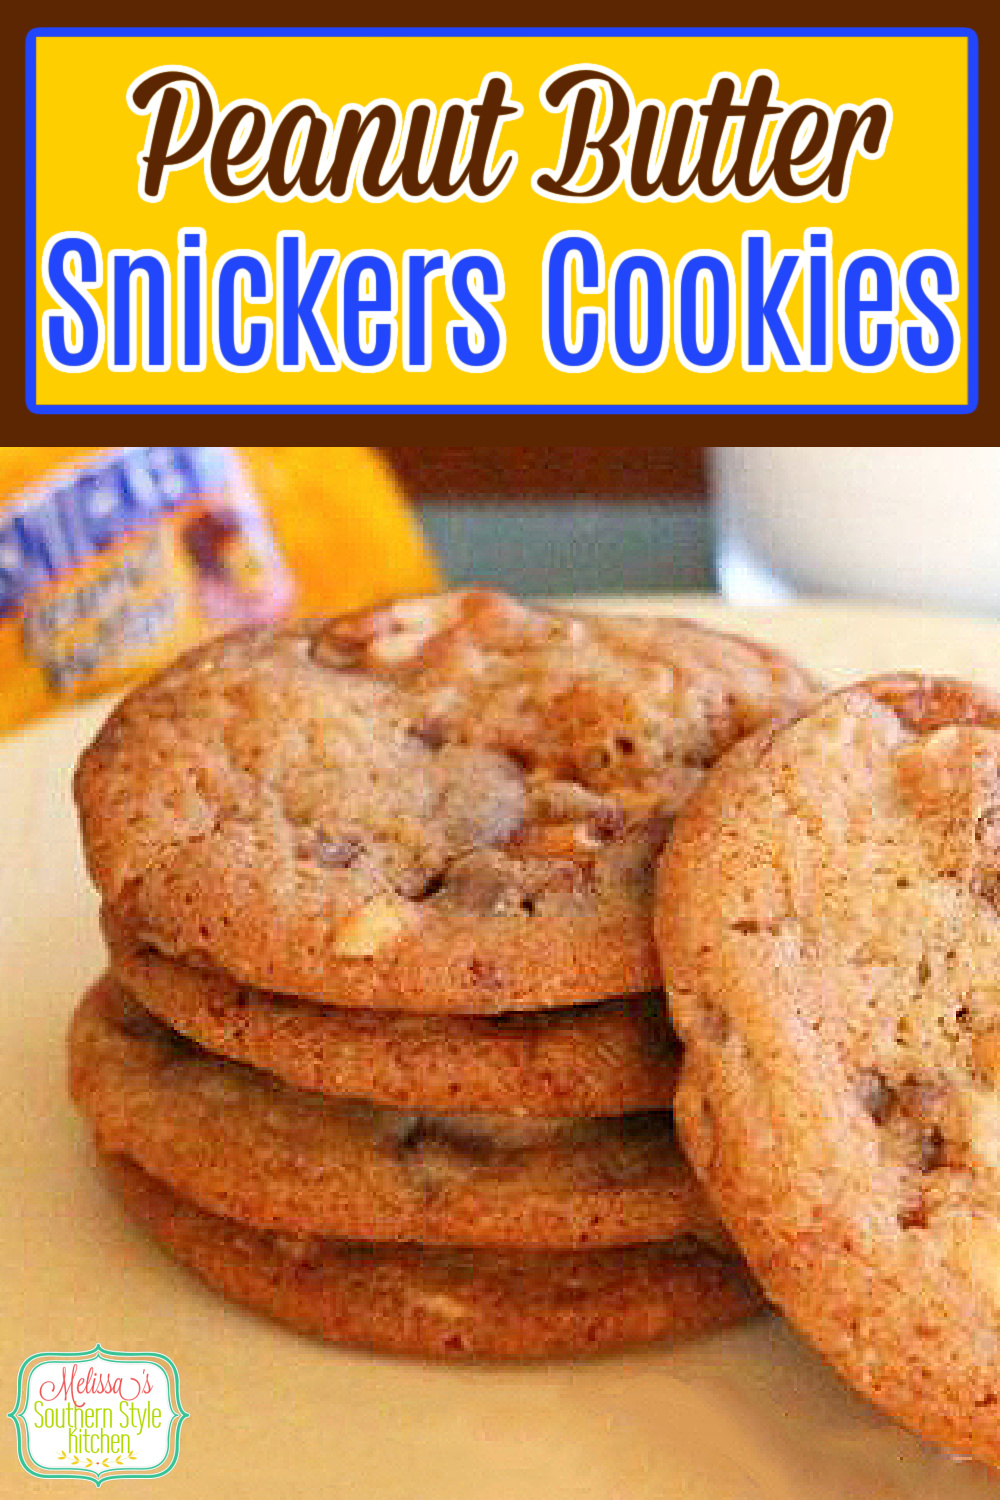 Snickers candy bars and peanut butter cookie dough collide in these Peanut Butter Snickers Cookies #candybars #candycookies #snickersbars #snickerscookies #holidaybaking #peanutbuttercookies via @melissasssk